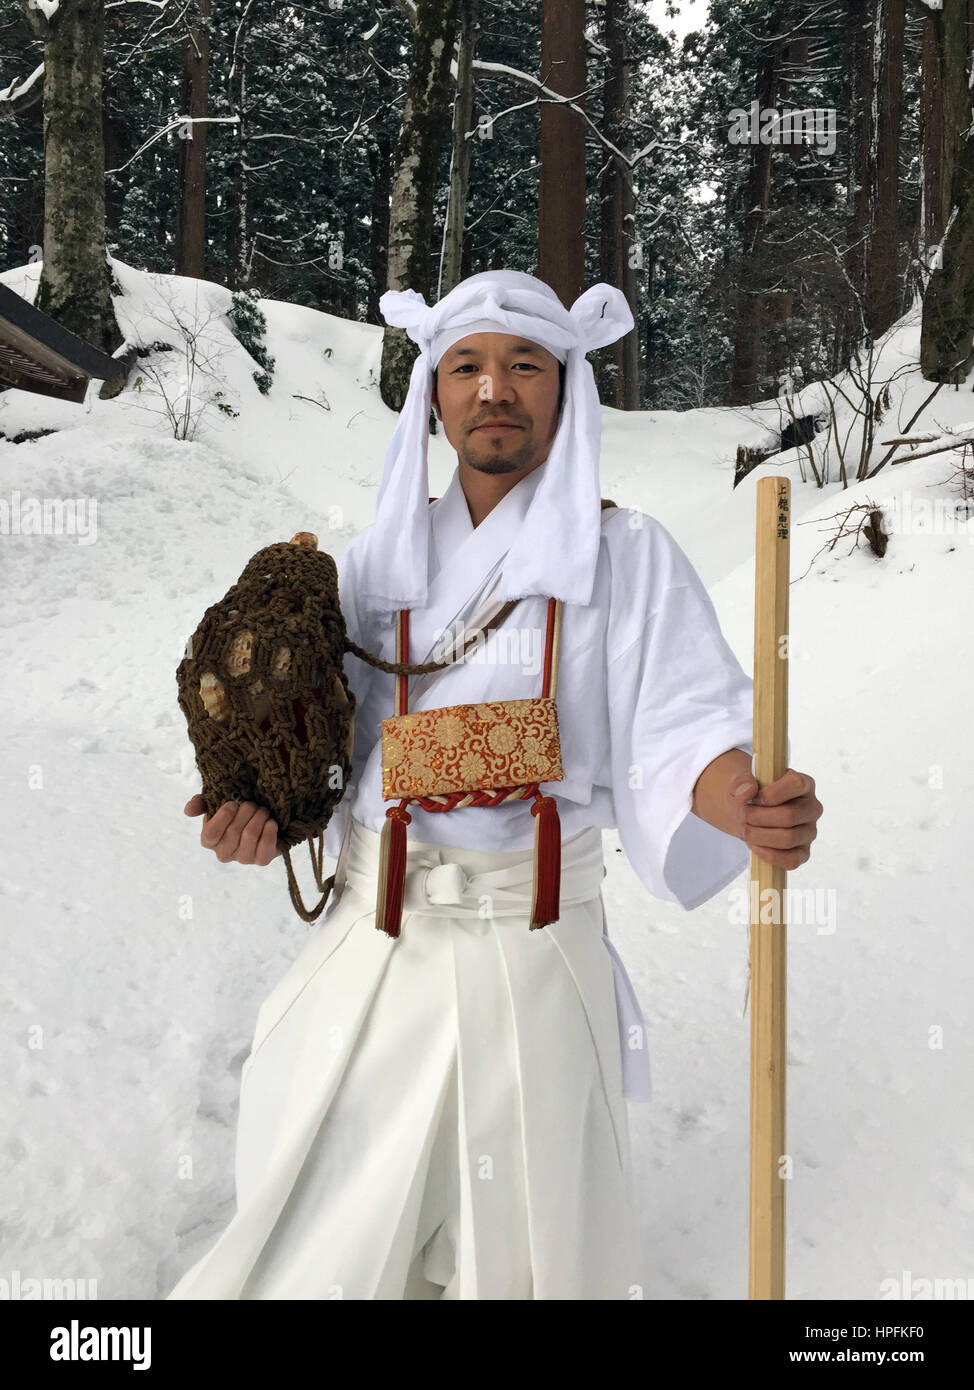 The Japanese Yamabushi mountain ascetic Takehiro Miura holds a conch in snow-covered forest in the Yamagata Province, Japan, 15 February 2017. Monks and members of the laity have retreated into the mountains in the area to live a life immersed in ascetic rituals and prayer for some 1300 years. Photo: Lars Nicolaysen/dpa Stock Photo